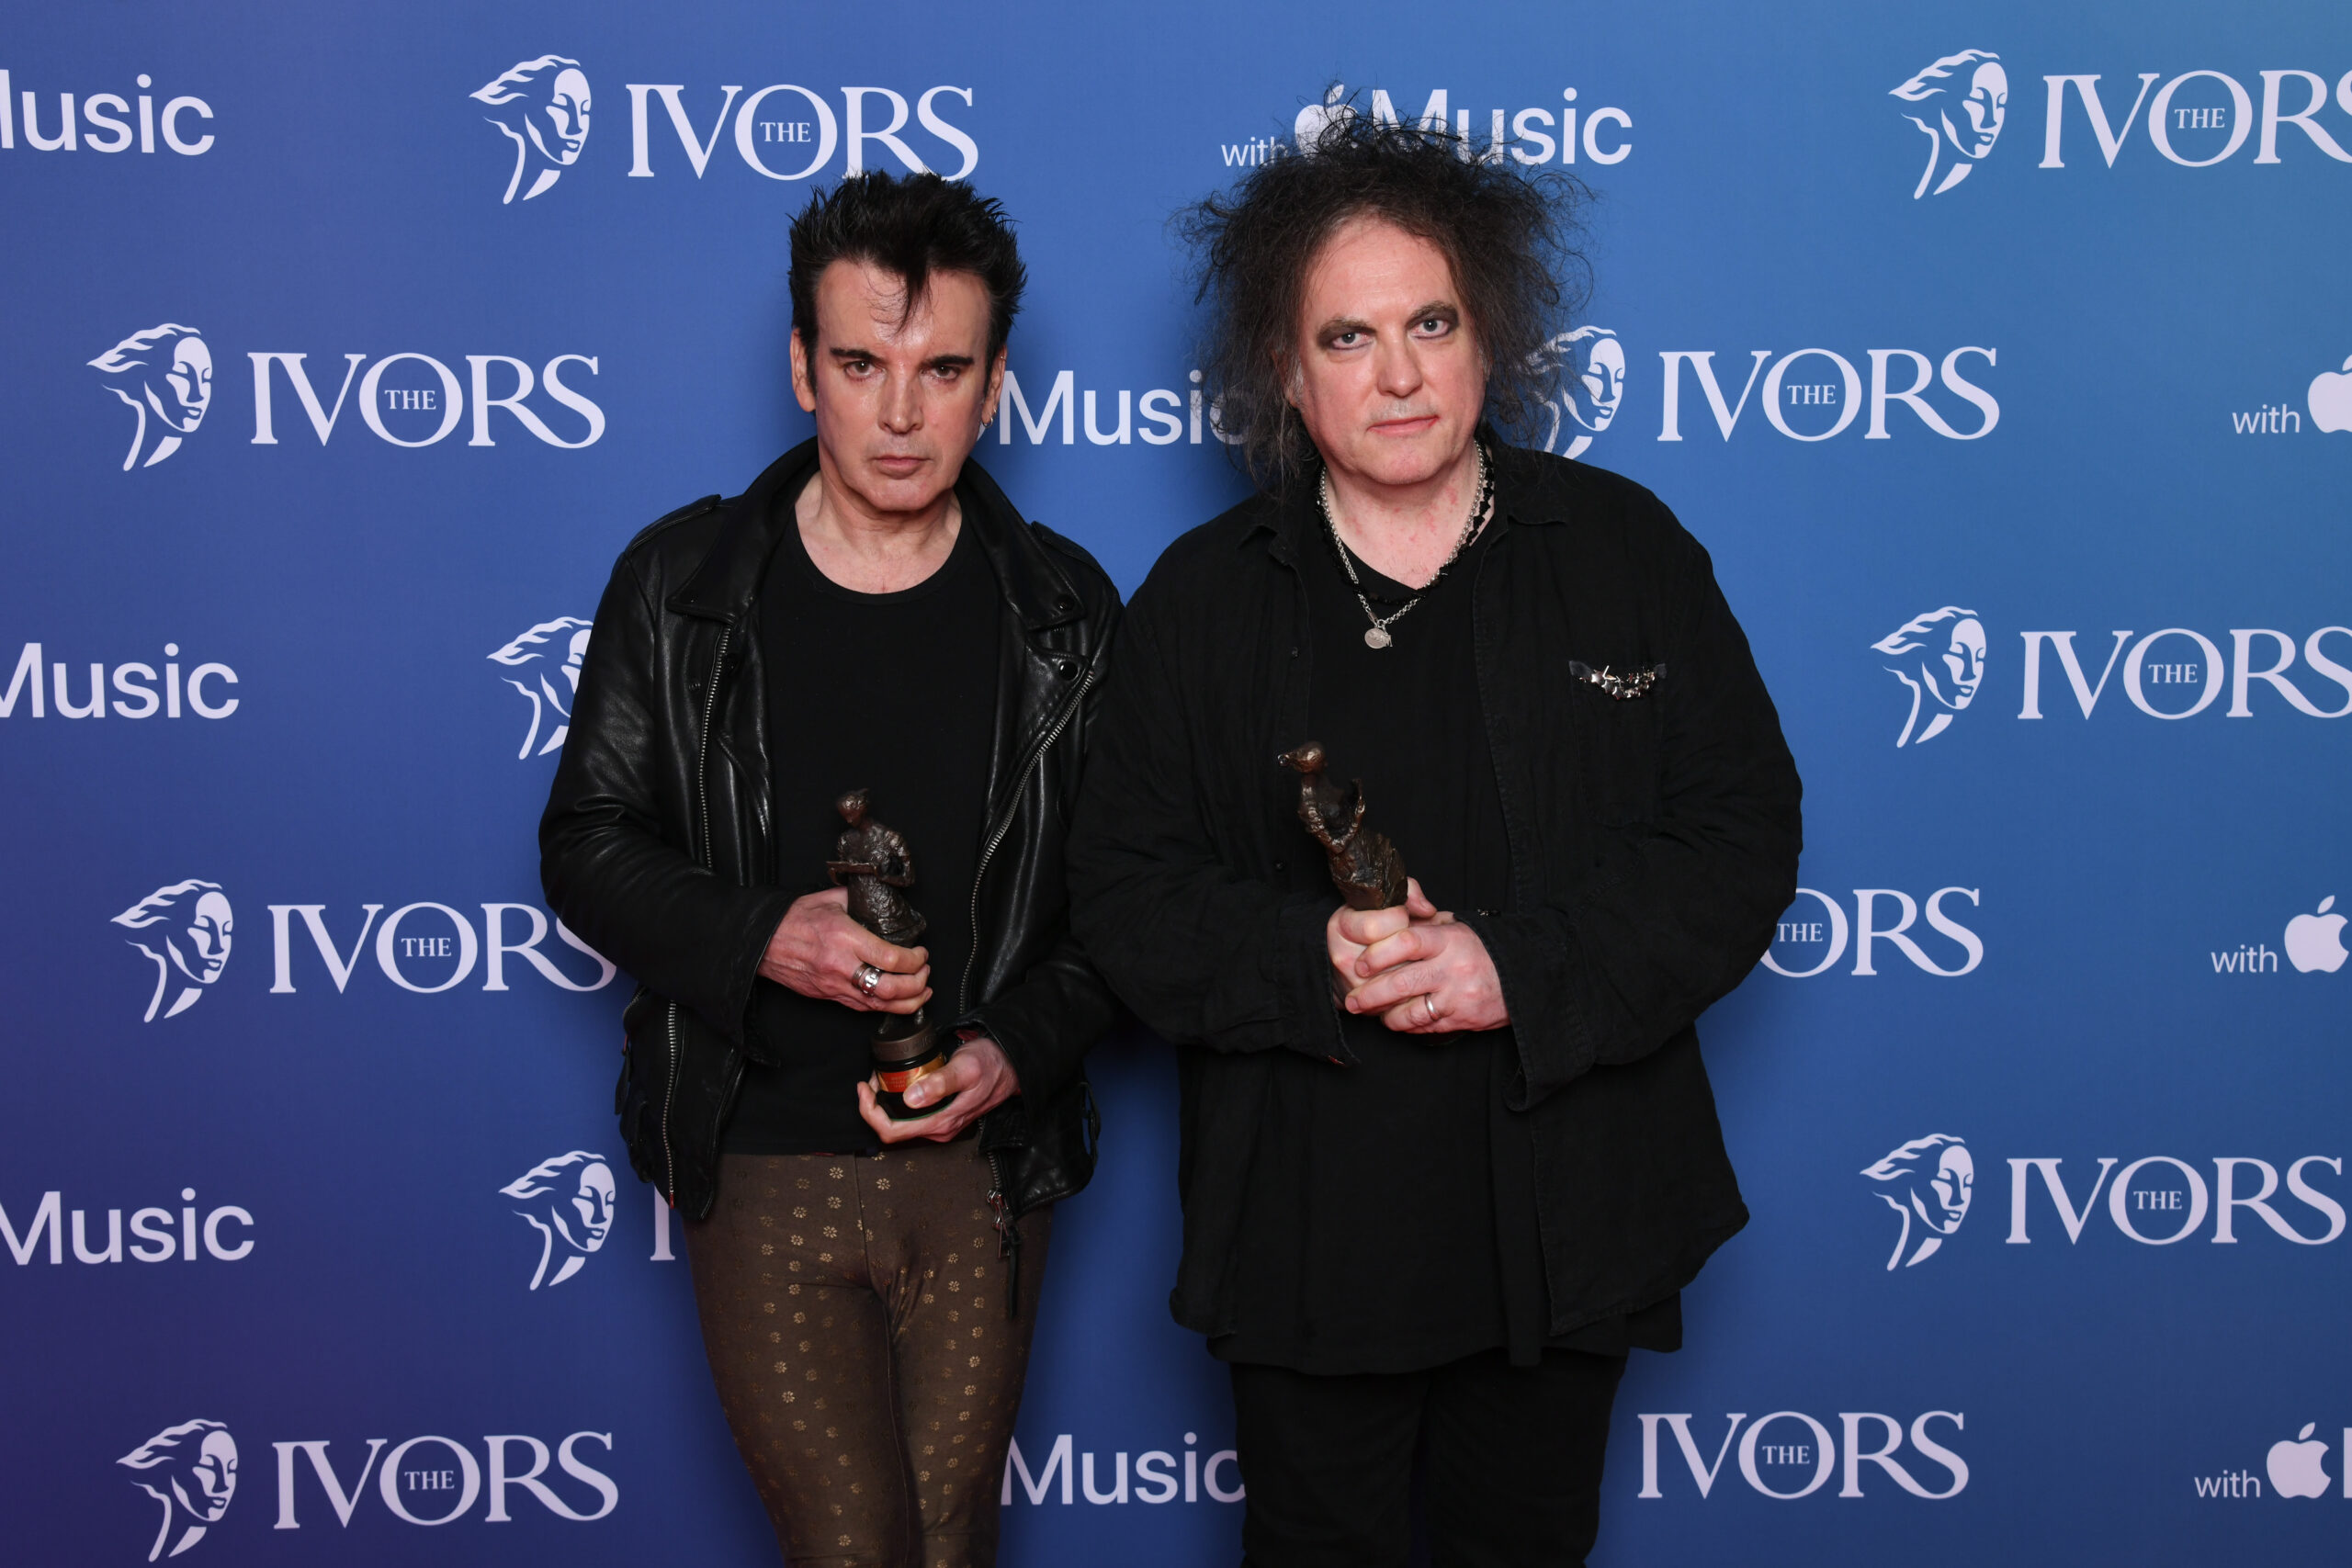 Robert Smith and Simon Gallup from The Cure at The Ivors 2022